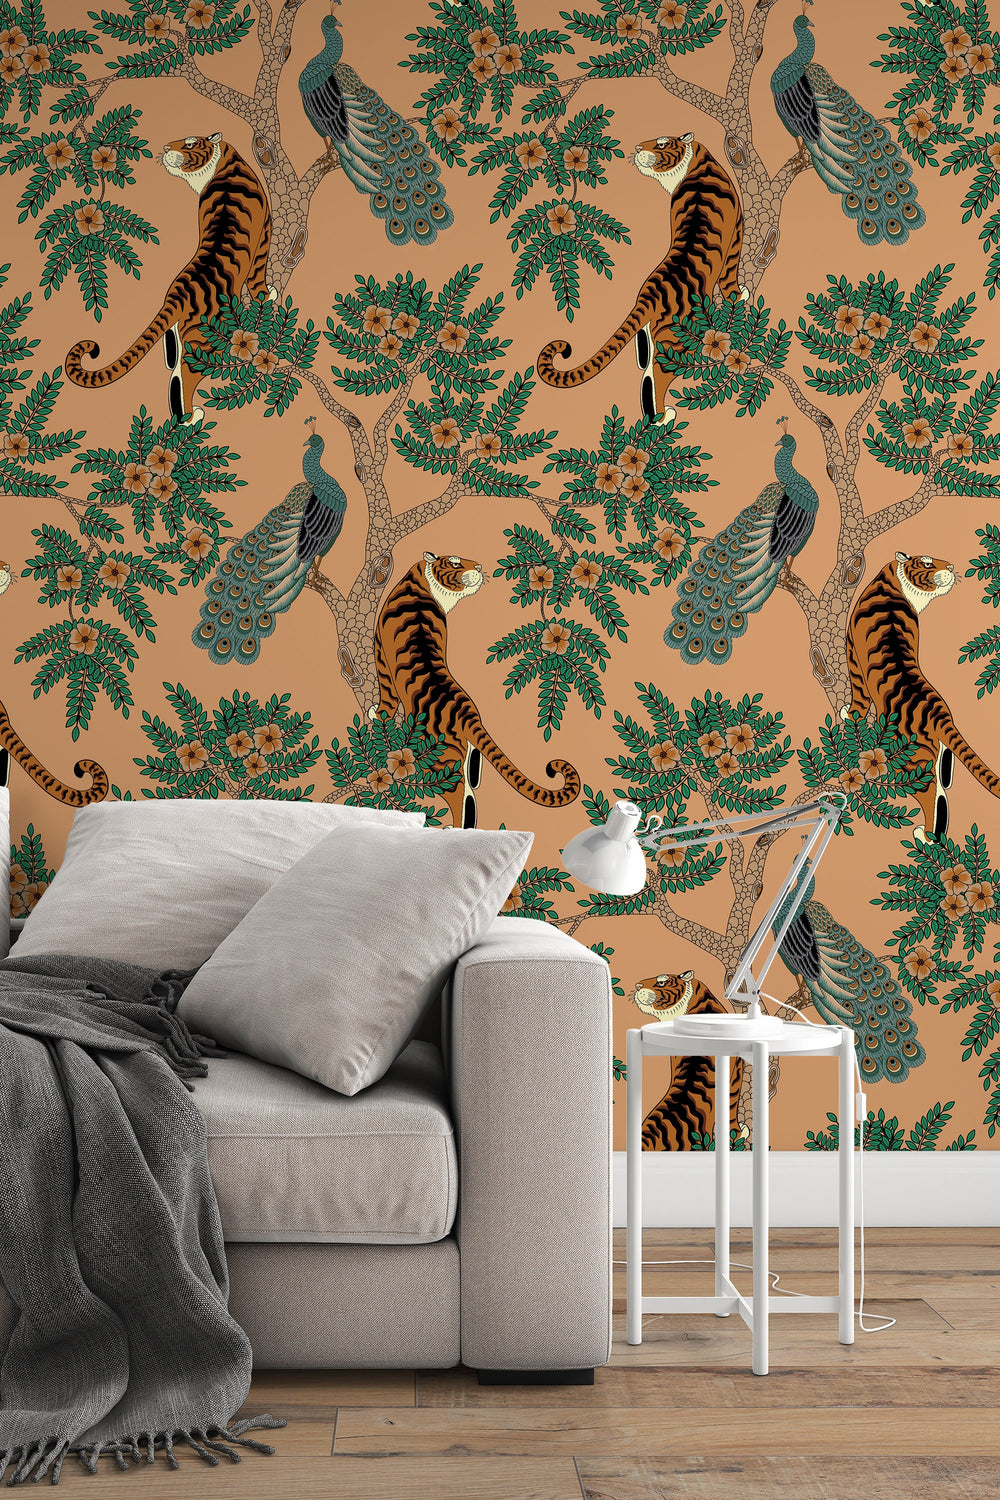 Tiger and Peacock in the woods - Peel & Stick Wallpaper - Removable Self Adhesive and traditional wallpaper #3183